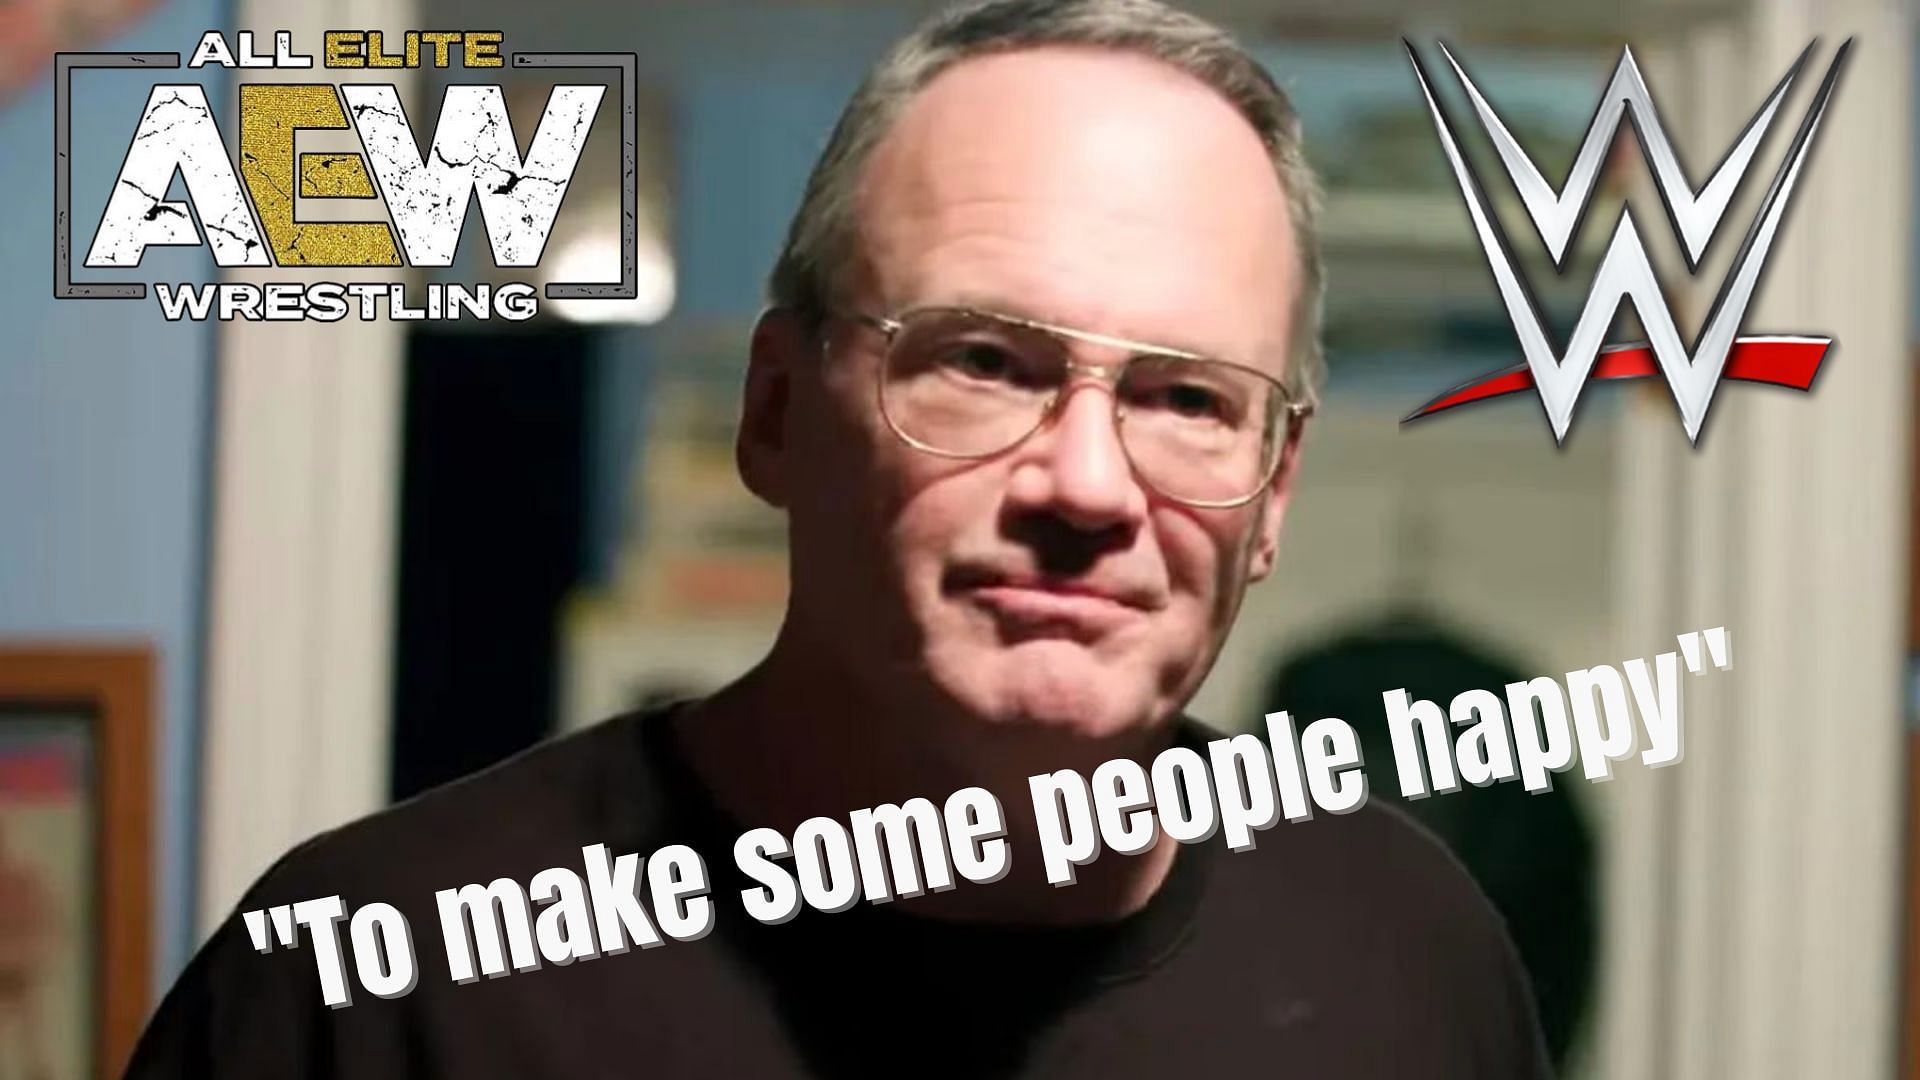 Jim Cornette shared an interesting opinion this week